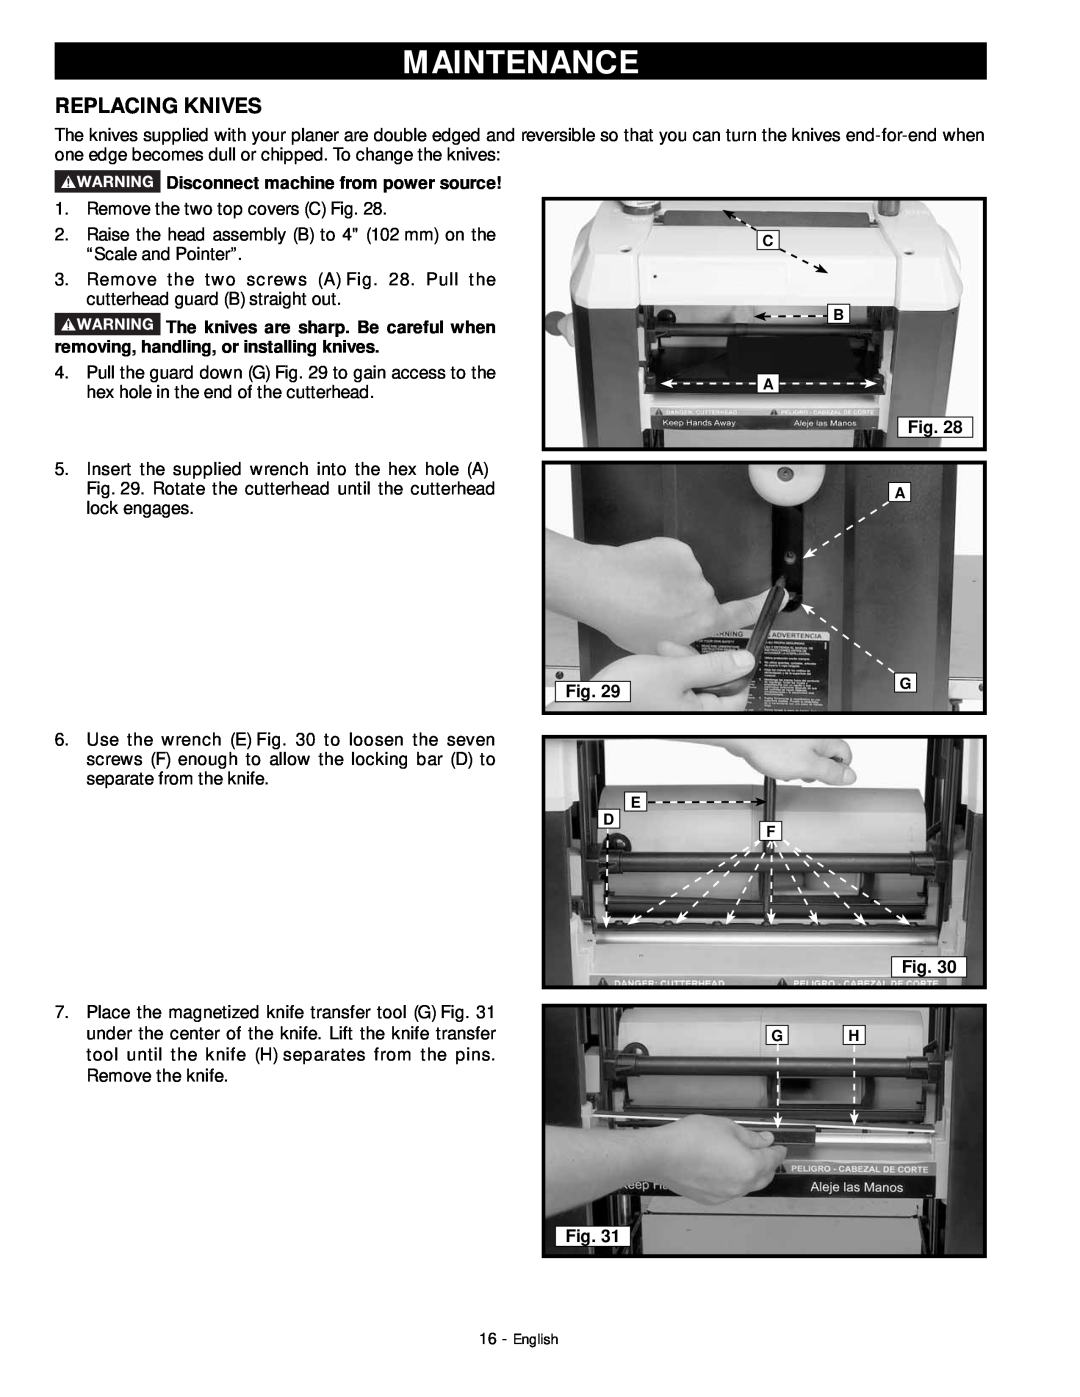 DeWalt 18657 instruction manual Maintenance, Replacing Knives, Disconnect machine from power source 